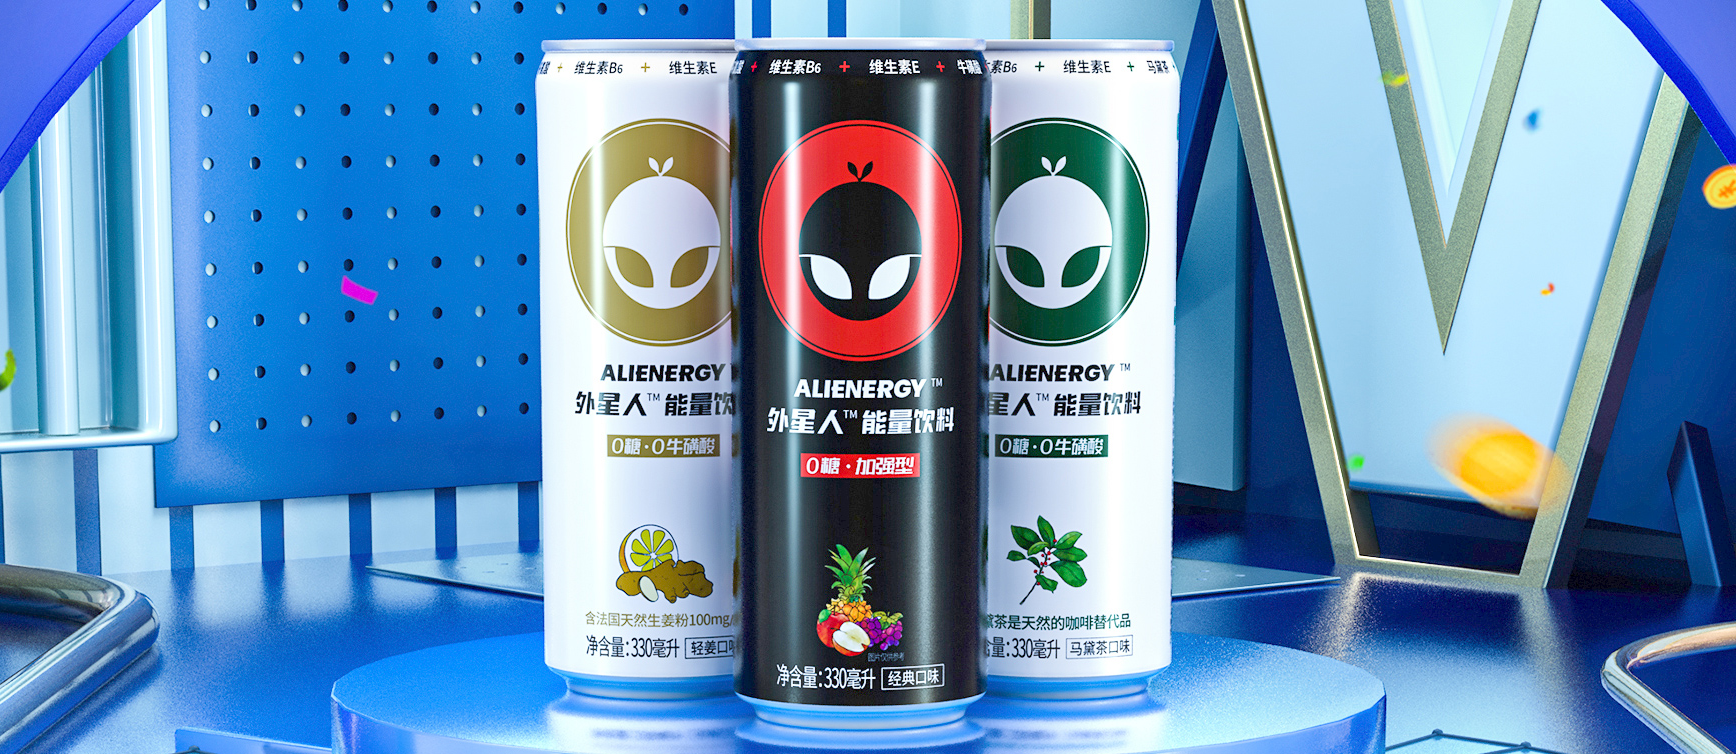 Genki Forest launched new brand of energy drink